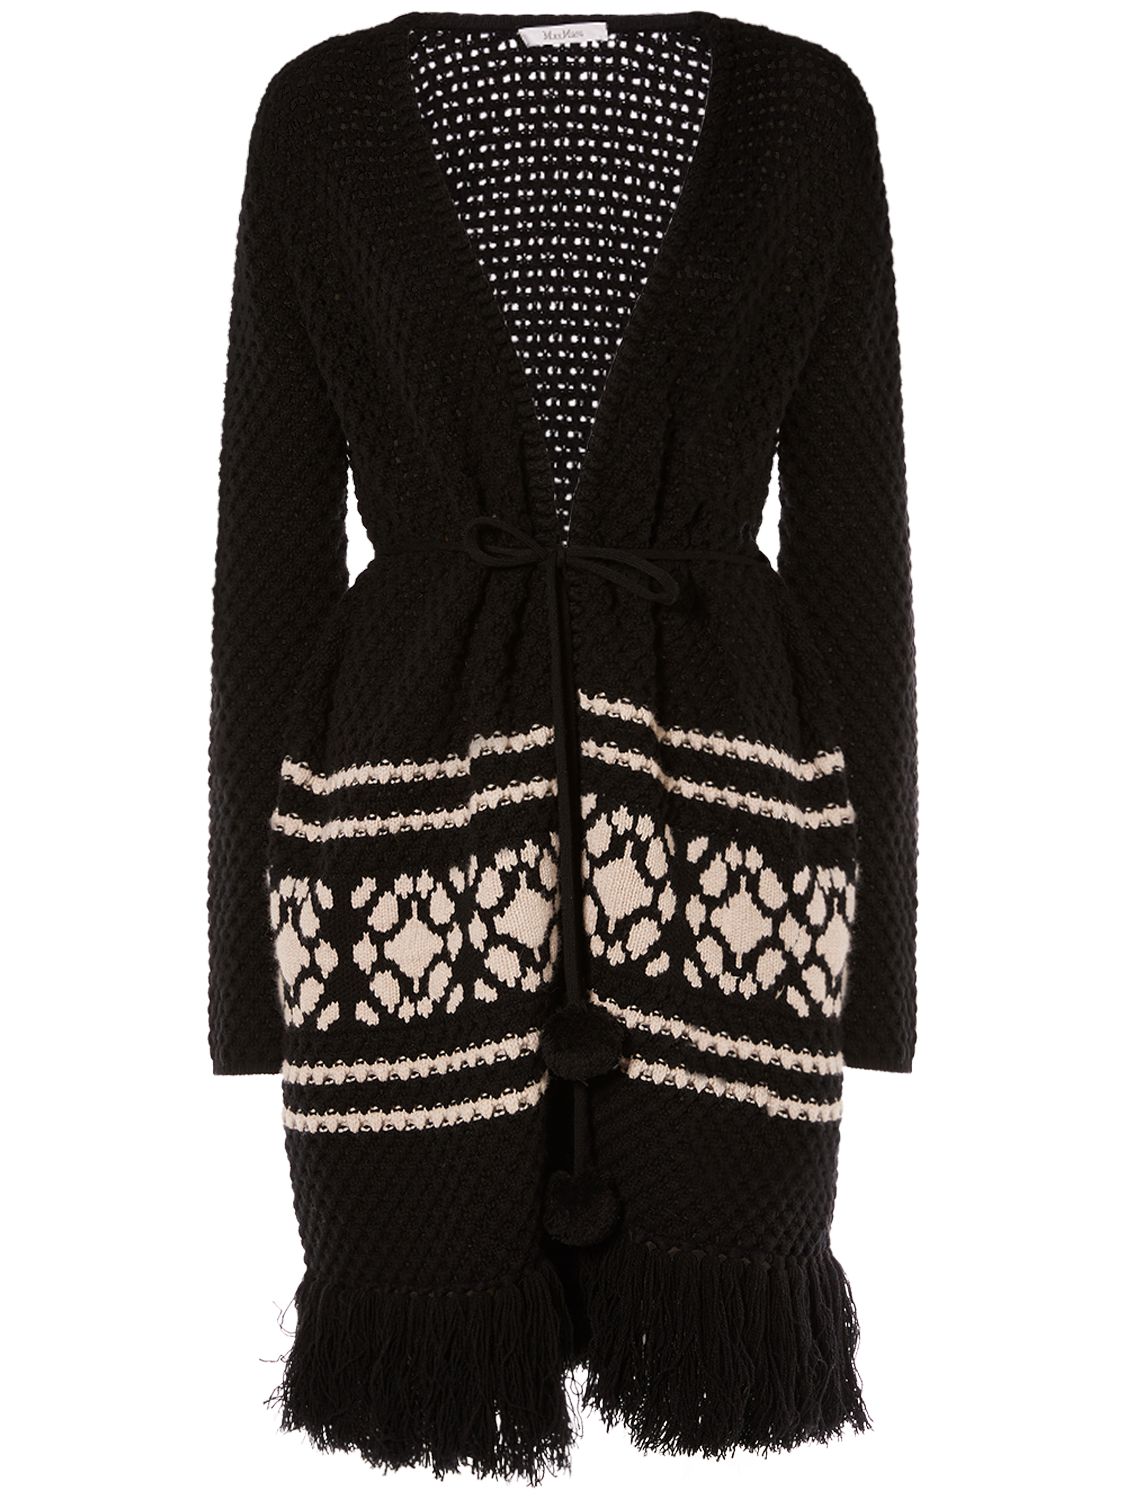 Orione Wool & Cashmere Knit Cardigan